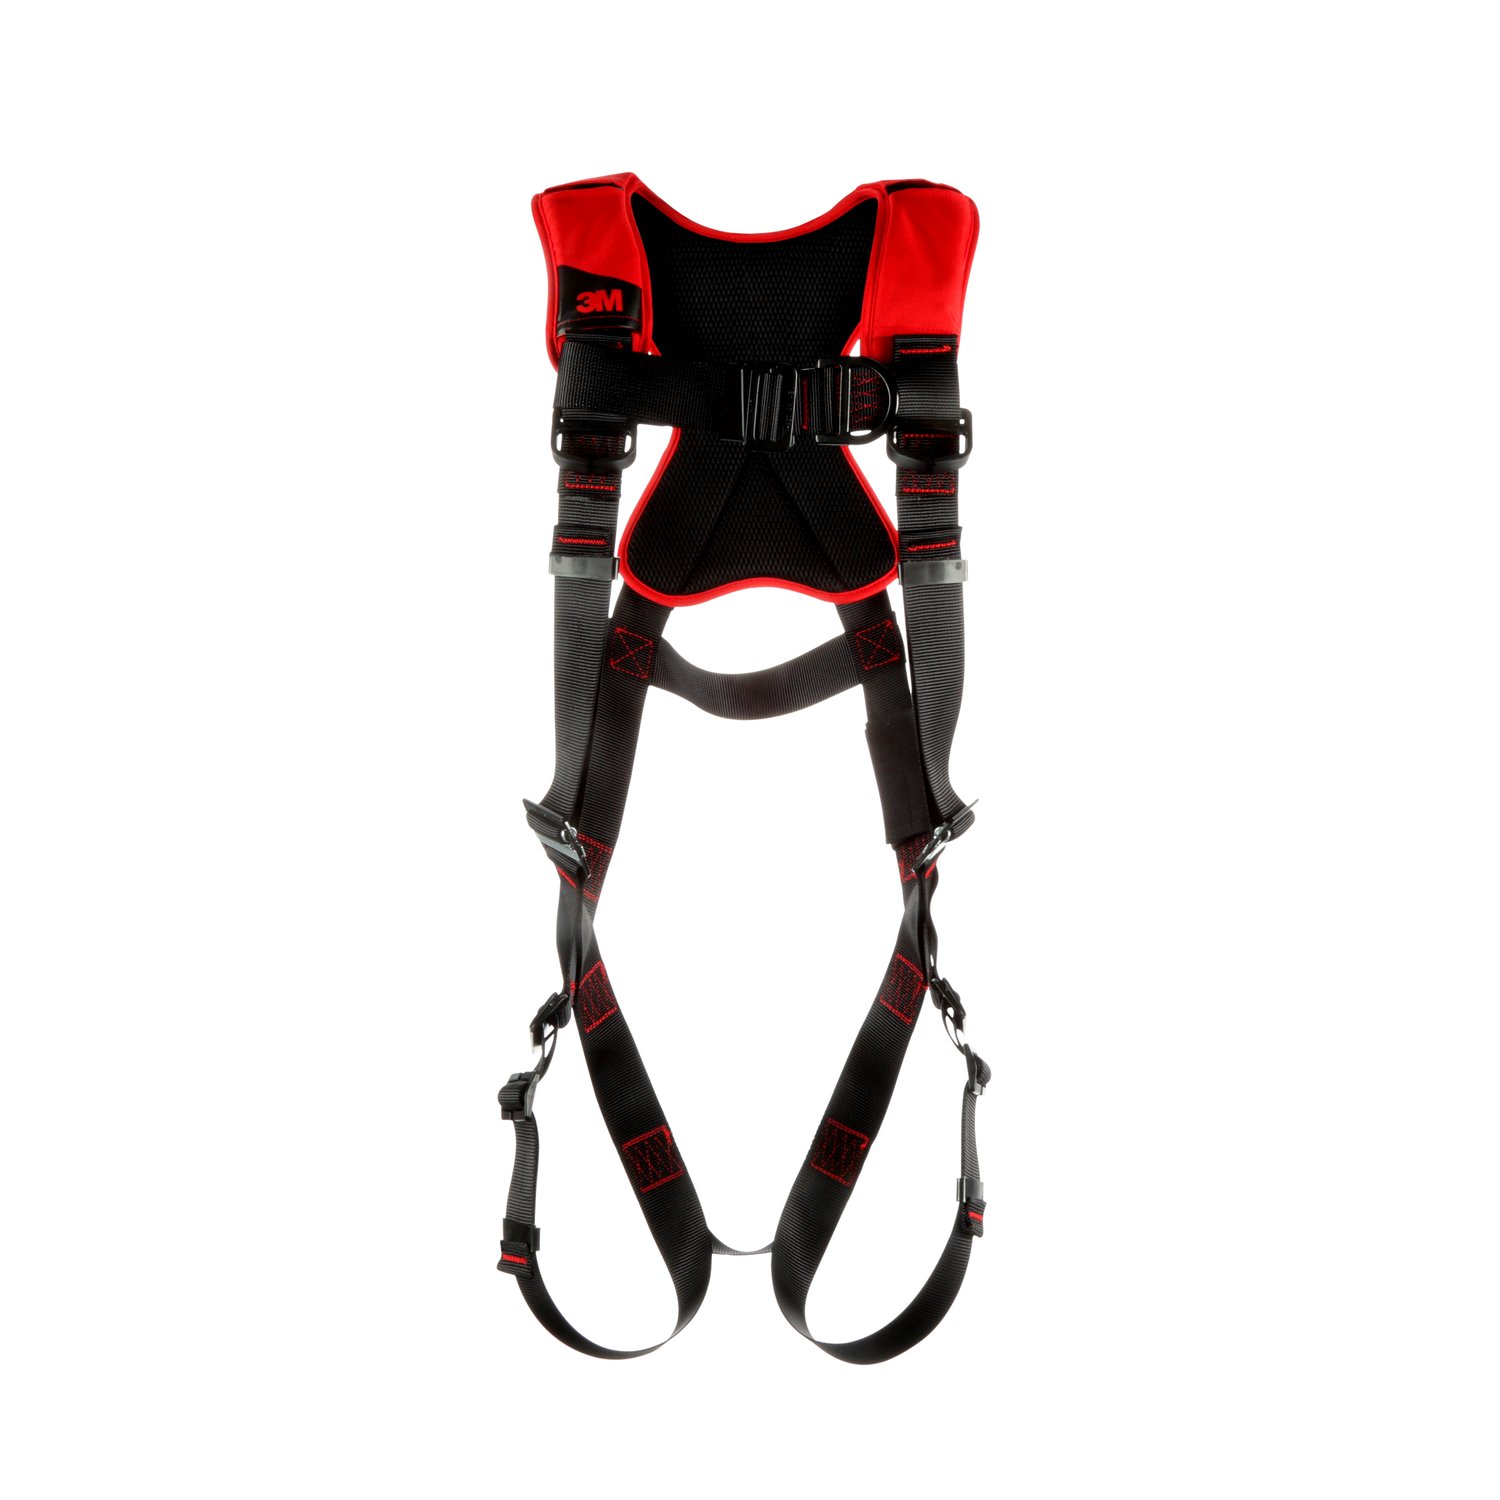 7012816715 - 3M Protecta P200 Comfort Vest Climbing Safety Harness 1161435, X-Large